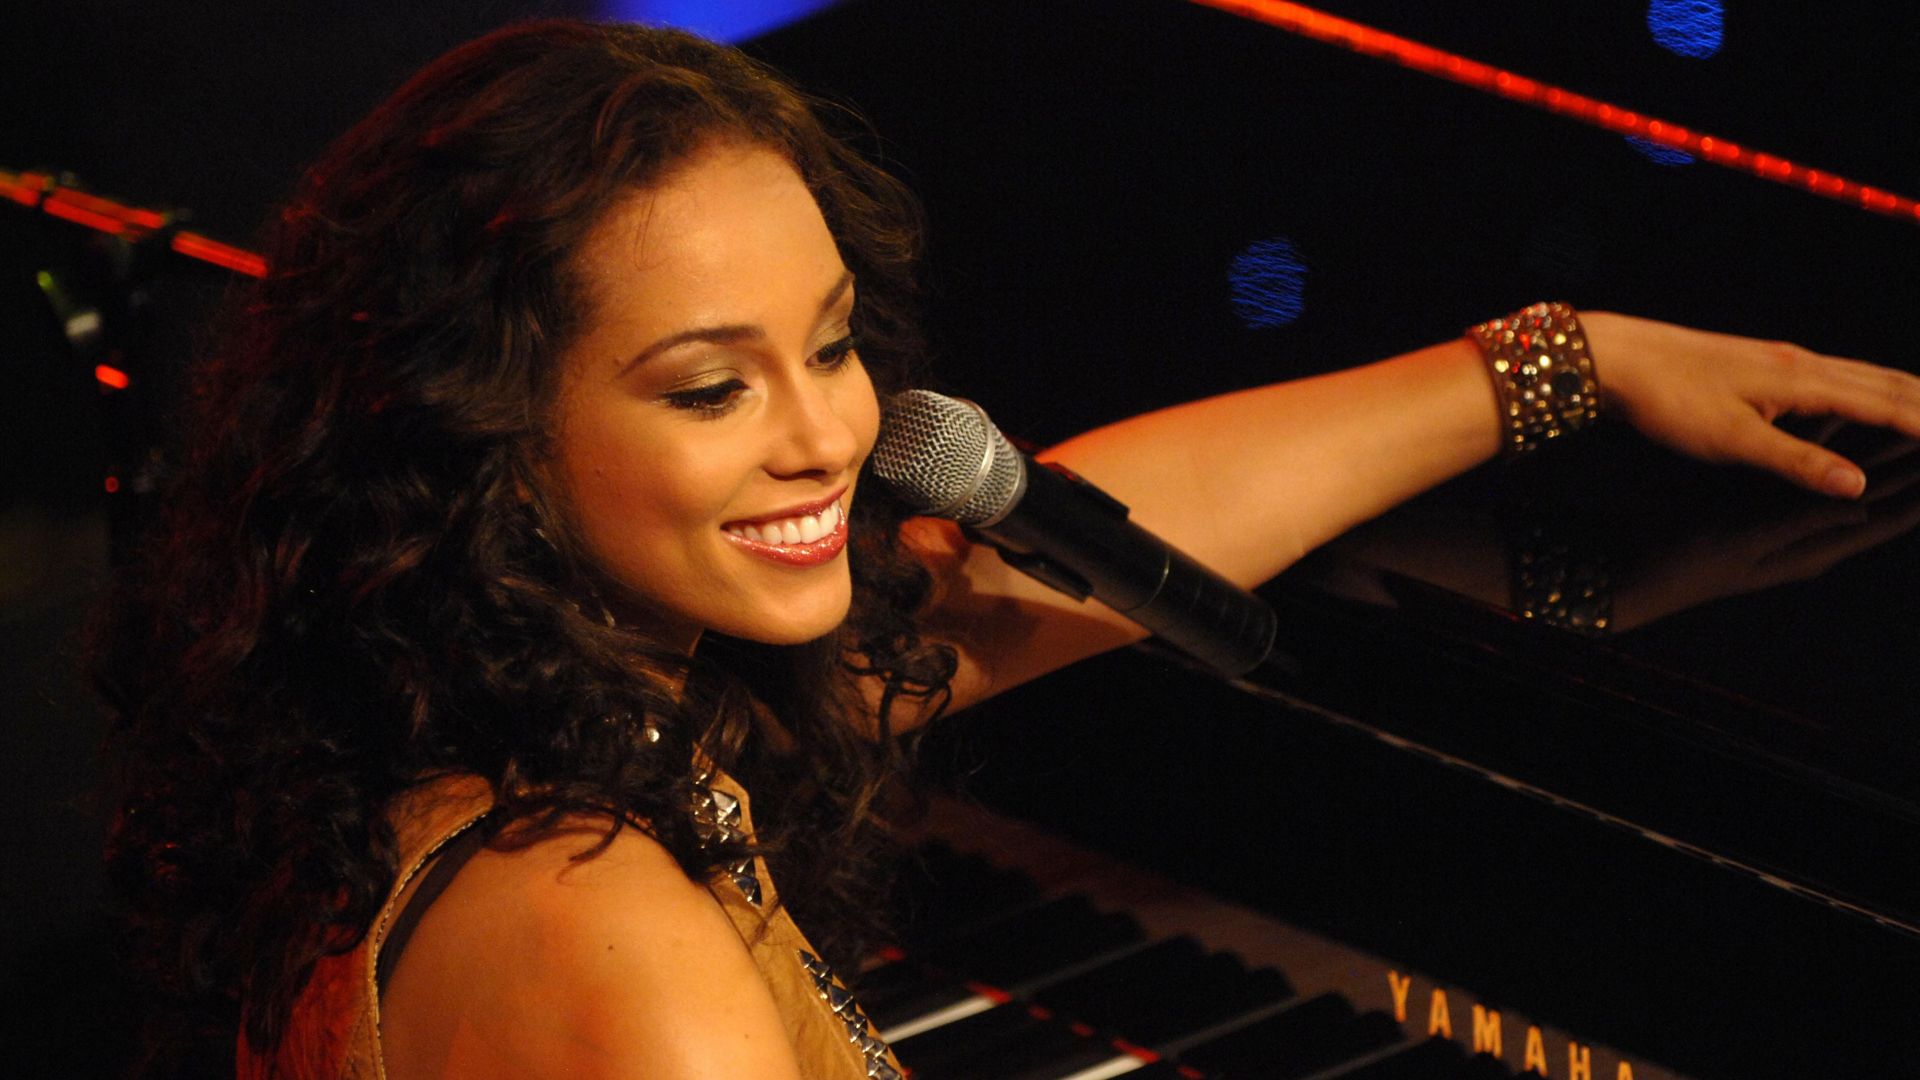 Alicia Keys Wallpapers High Quality Download Free